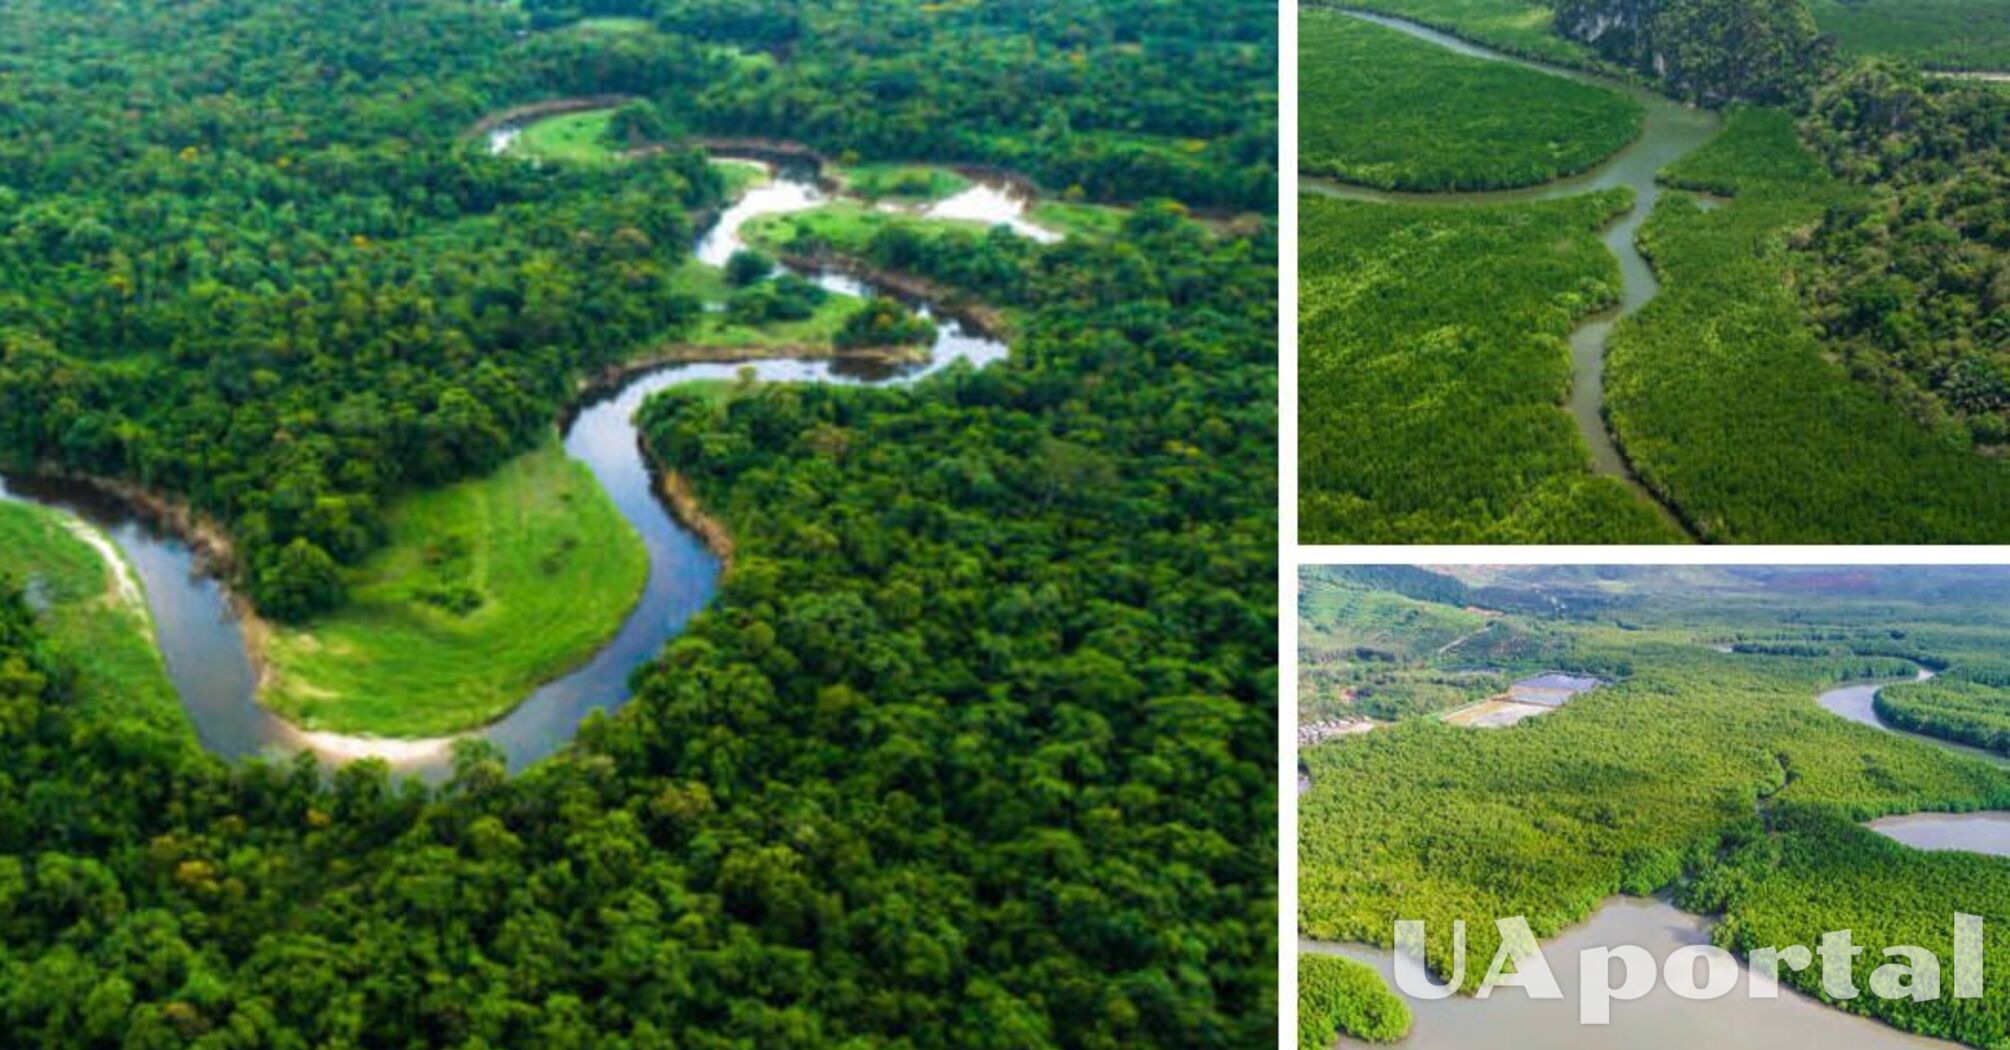 Valley of 2000-year-old settlements discovered in the Amazon forest (photo)